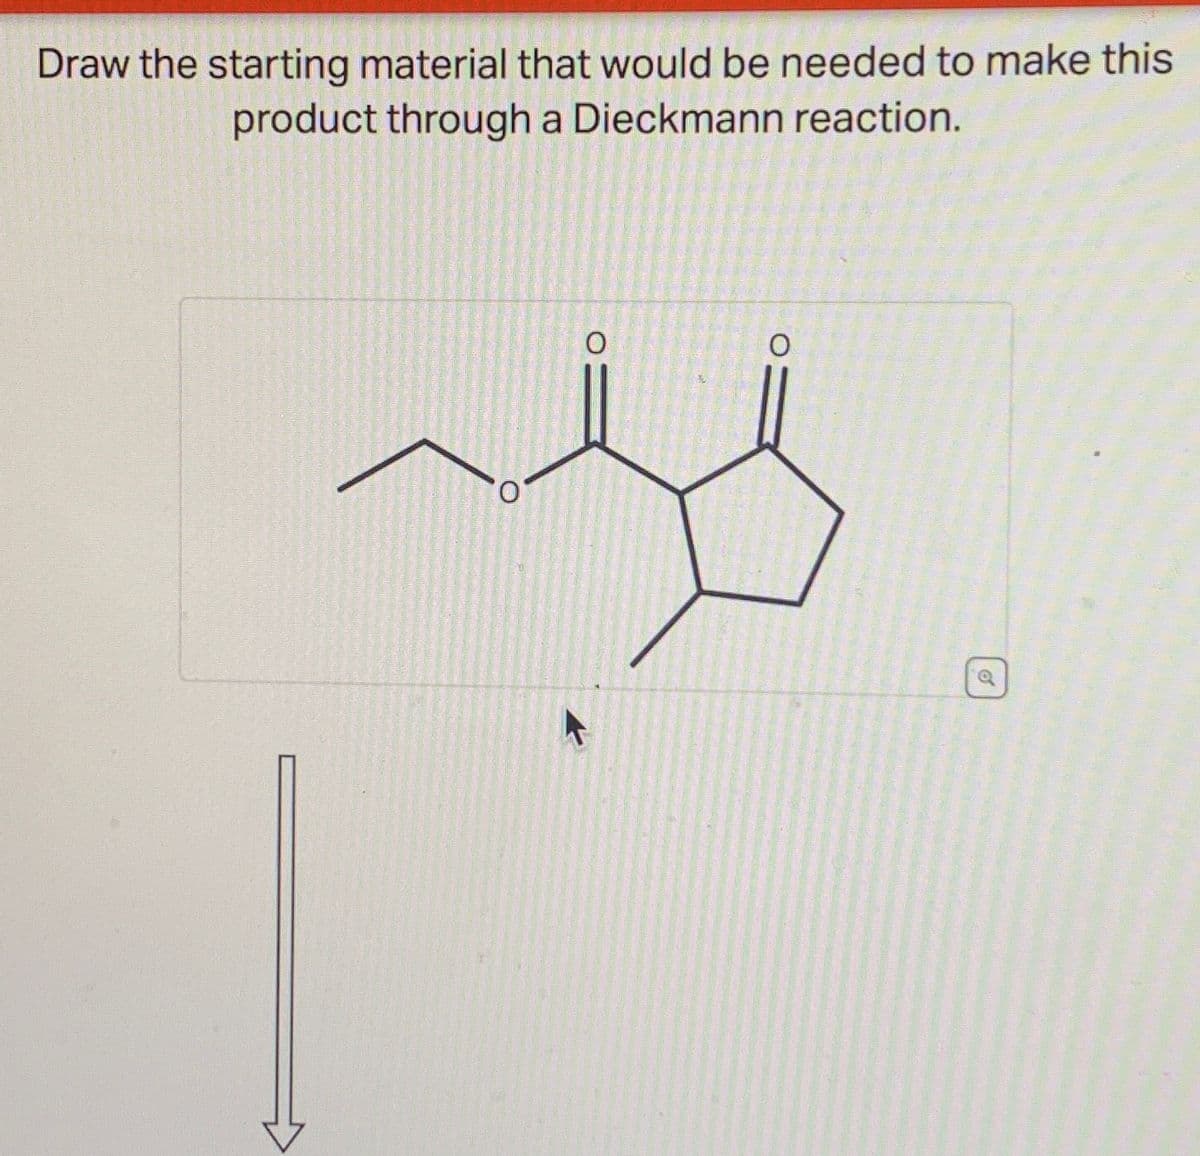 Draw the starting material that would be needed to make this
product through a Dieckmann reaction.
0
0
a
6